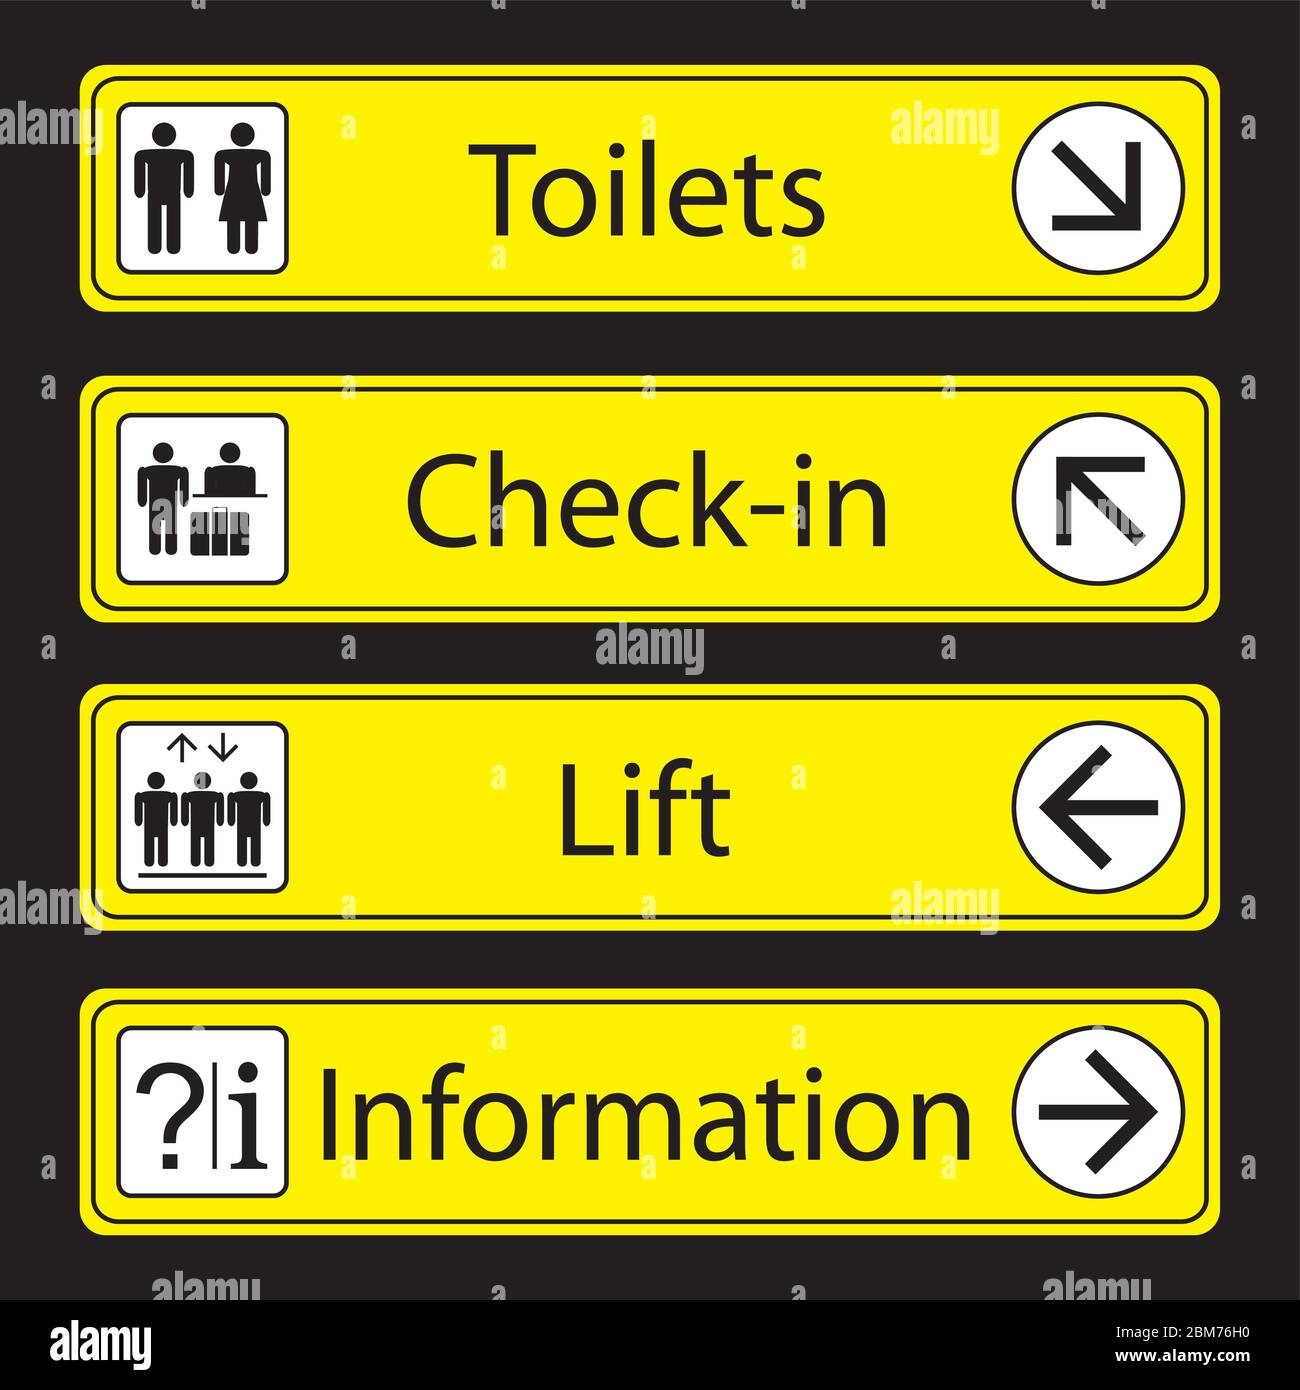 Airport Signs,isolated on black background,vector illustration. Stock Vector